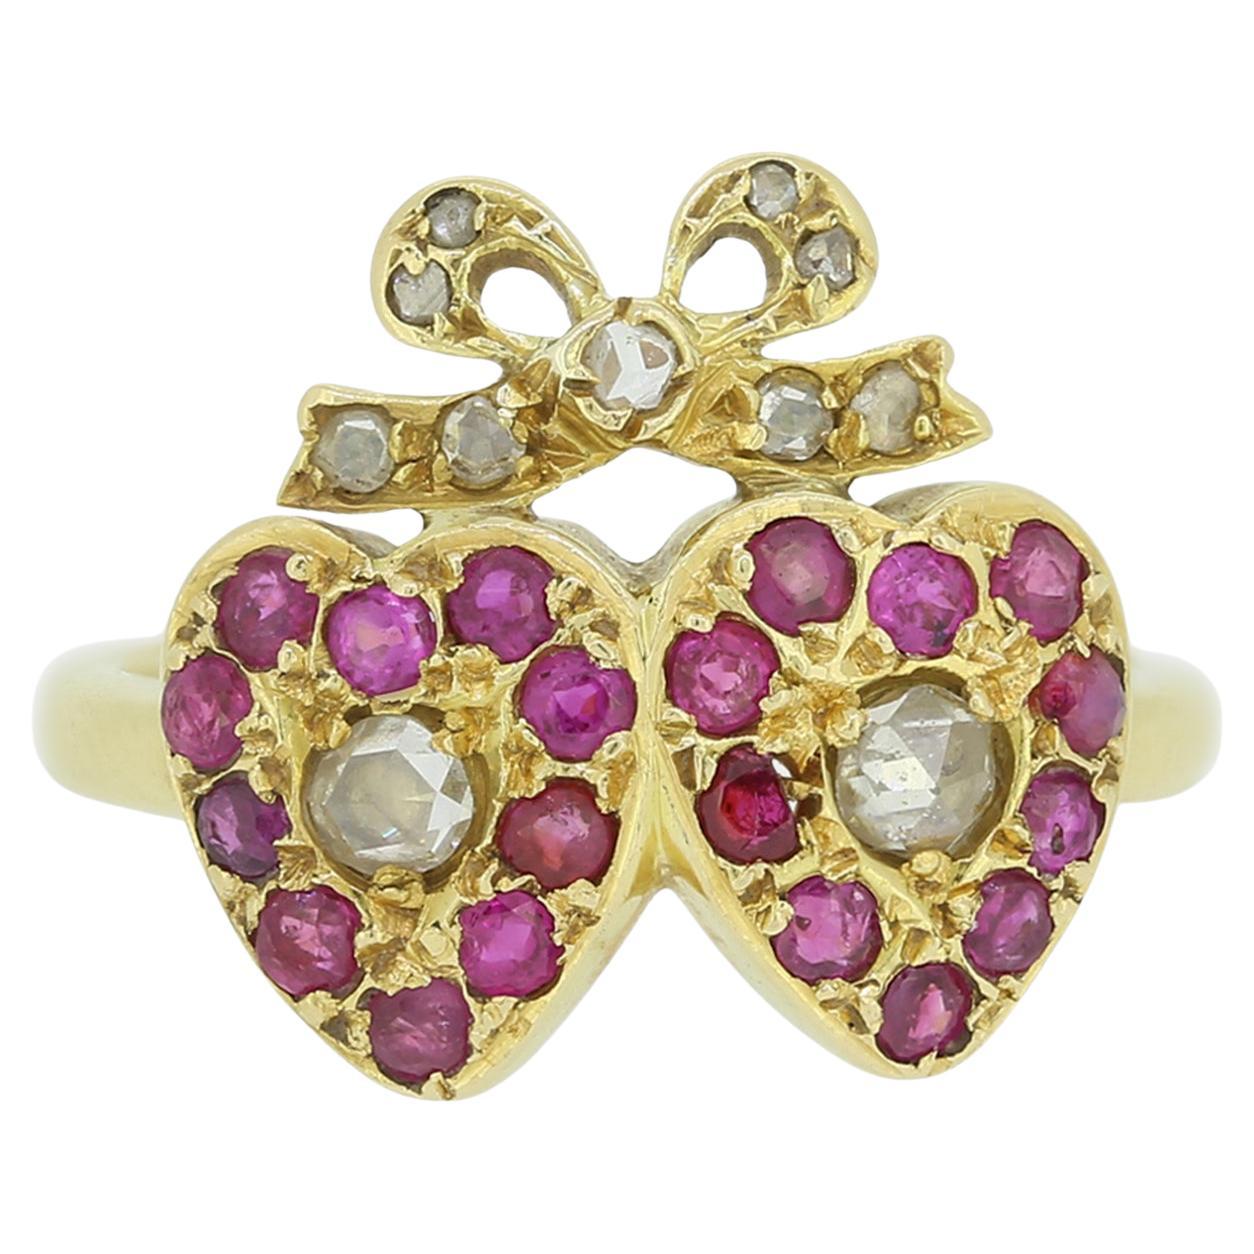 Edwardian Ruby and Diamond Double Heart Ring